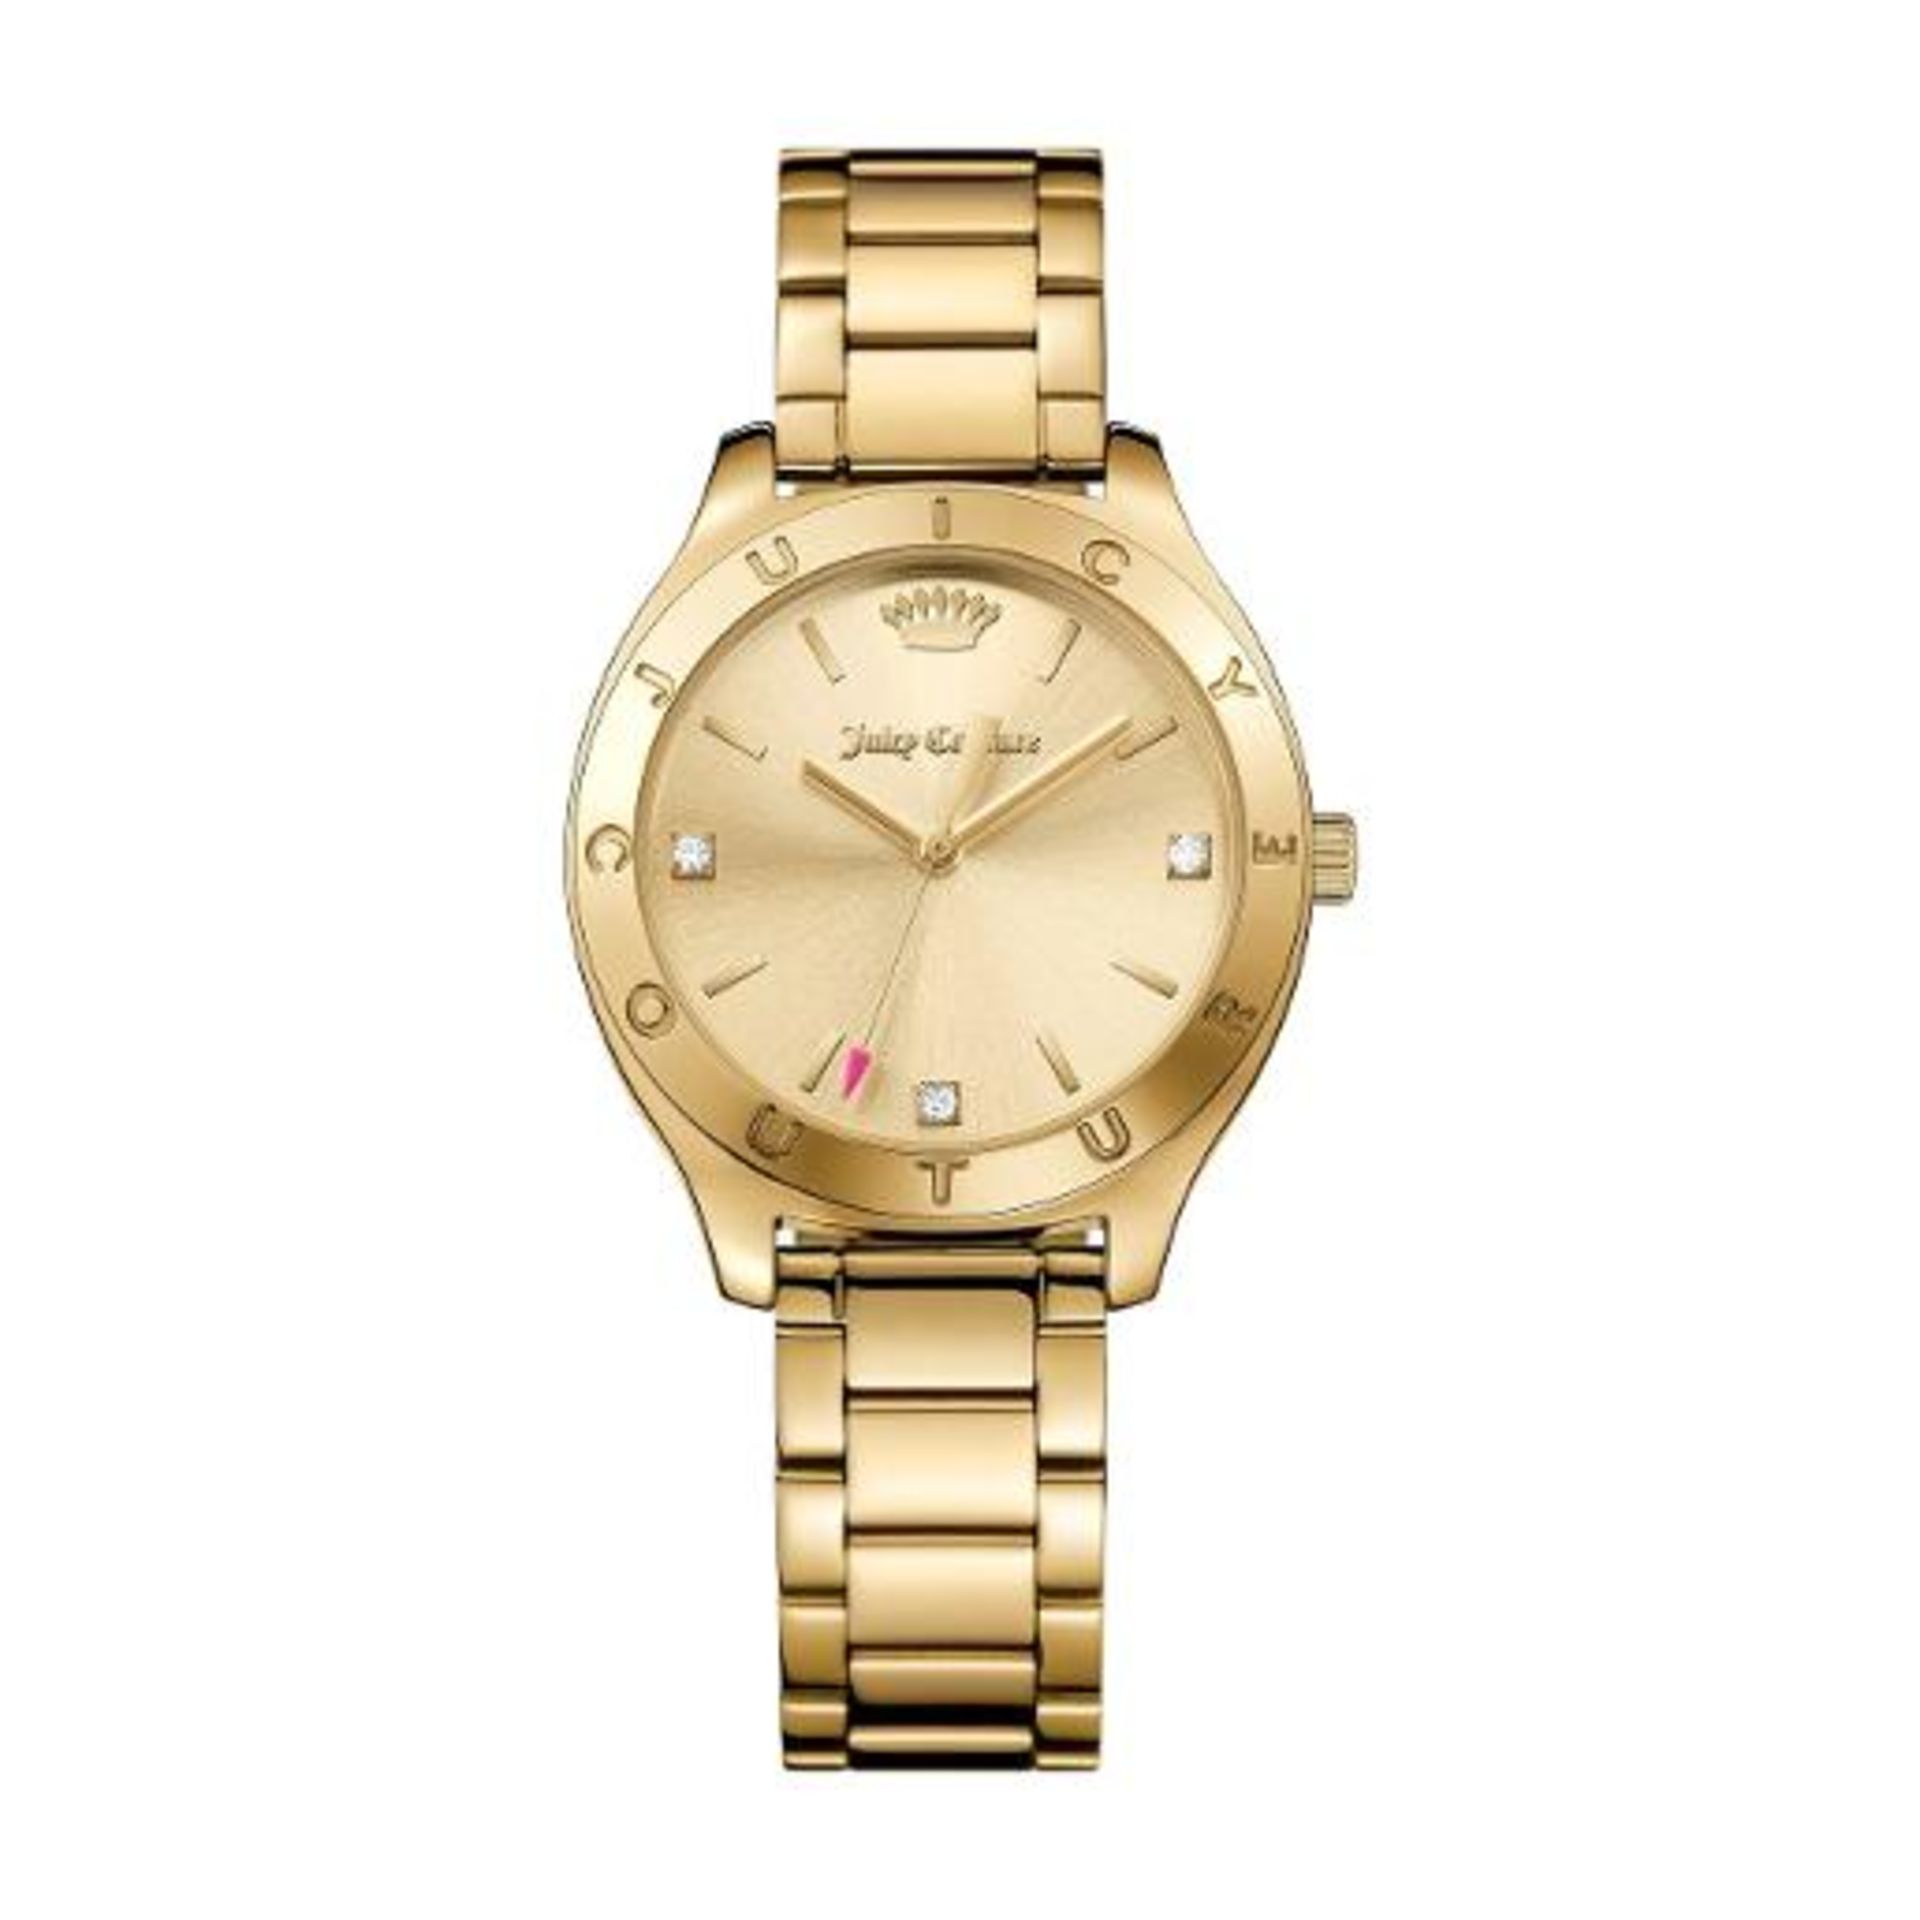 BRAND NEW JUICY COUTURE LADIES WRIST WATCH WITH 2 YEARS INTERNATIONAL WARRANTY (1901541)